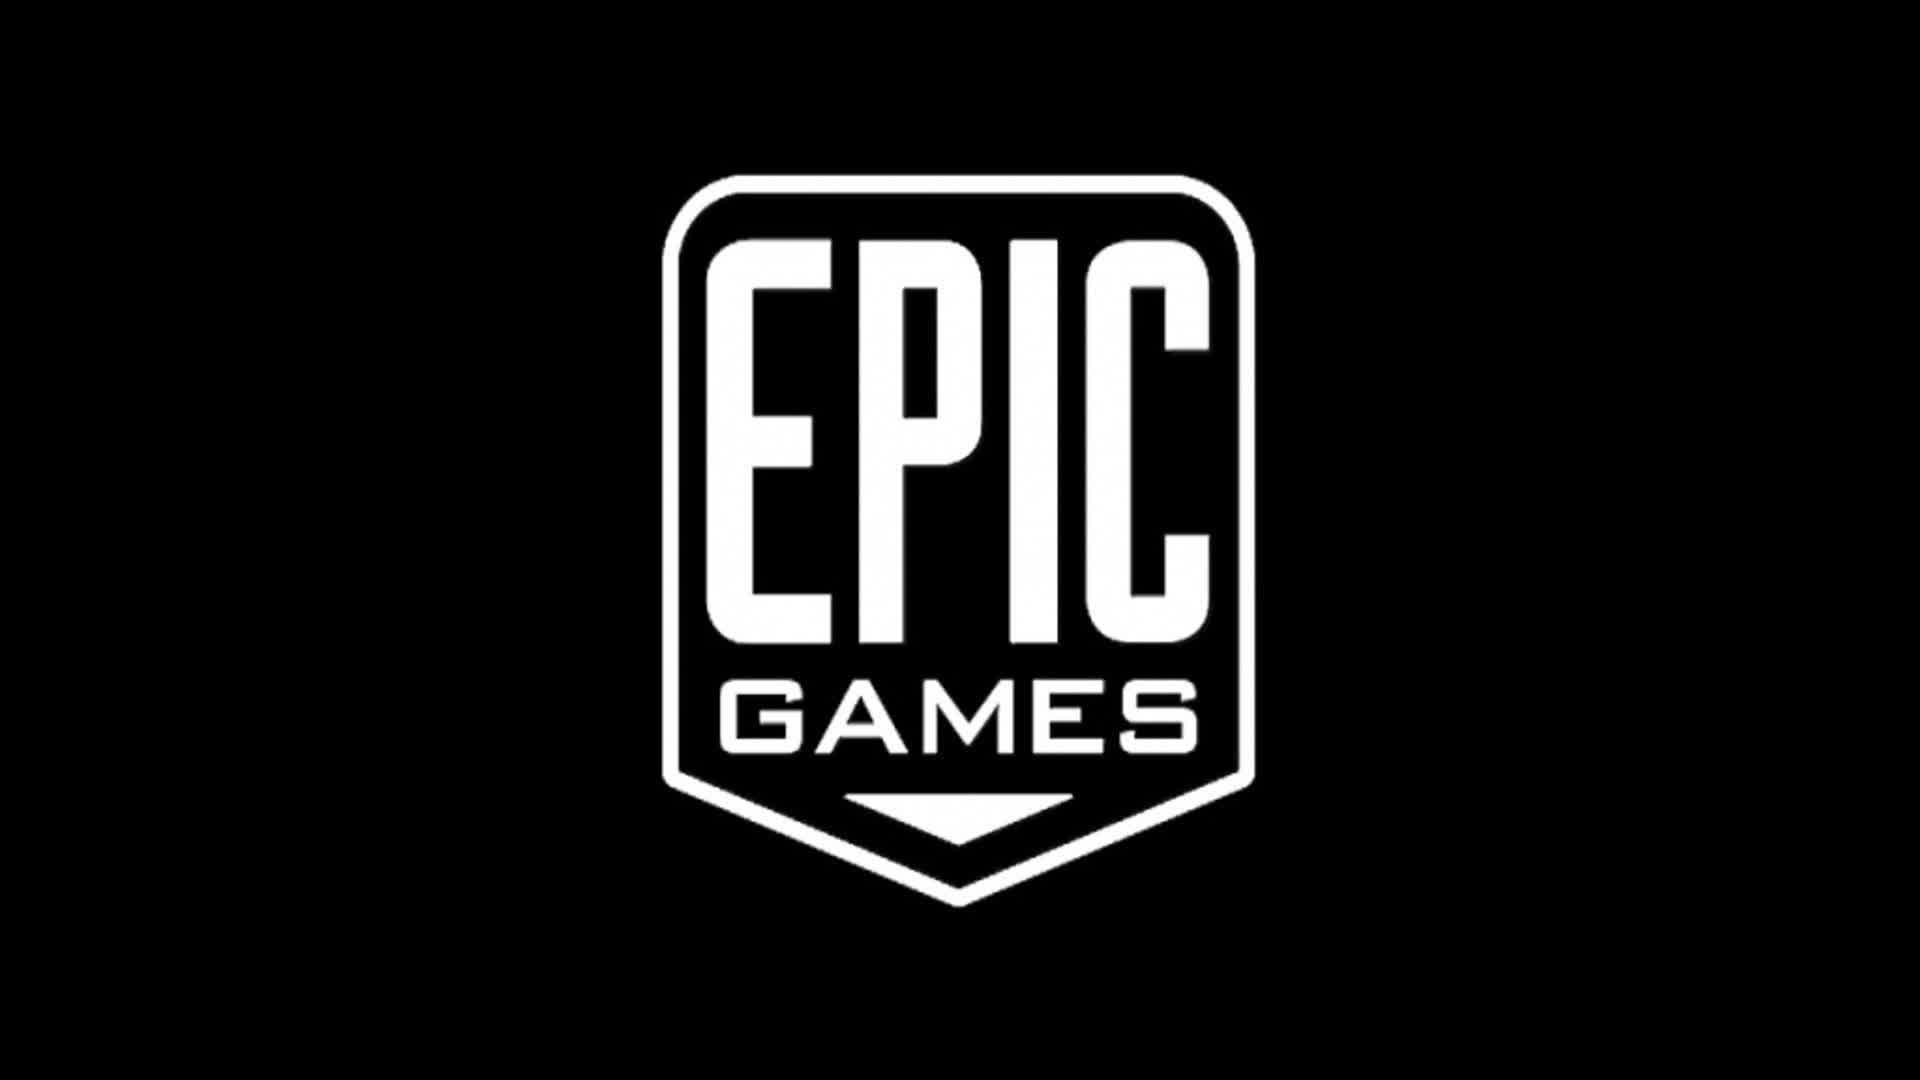 Epic Games will offer full employment to hundreds of temporary QA workers